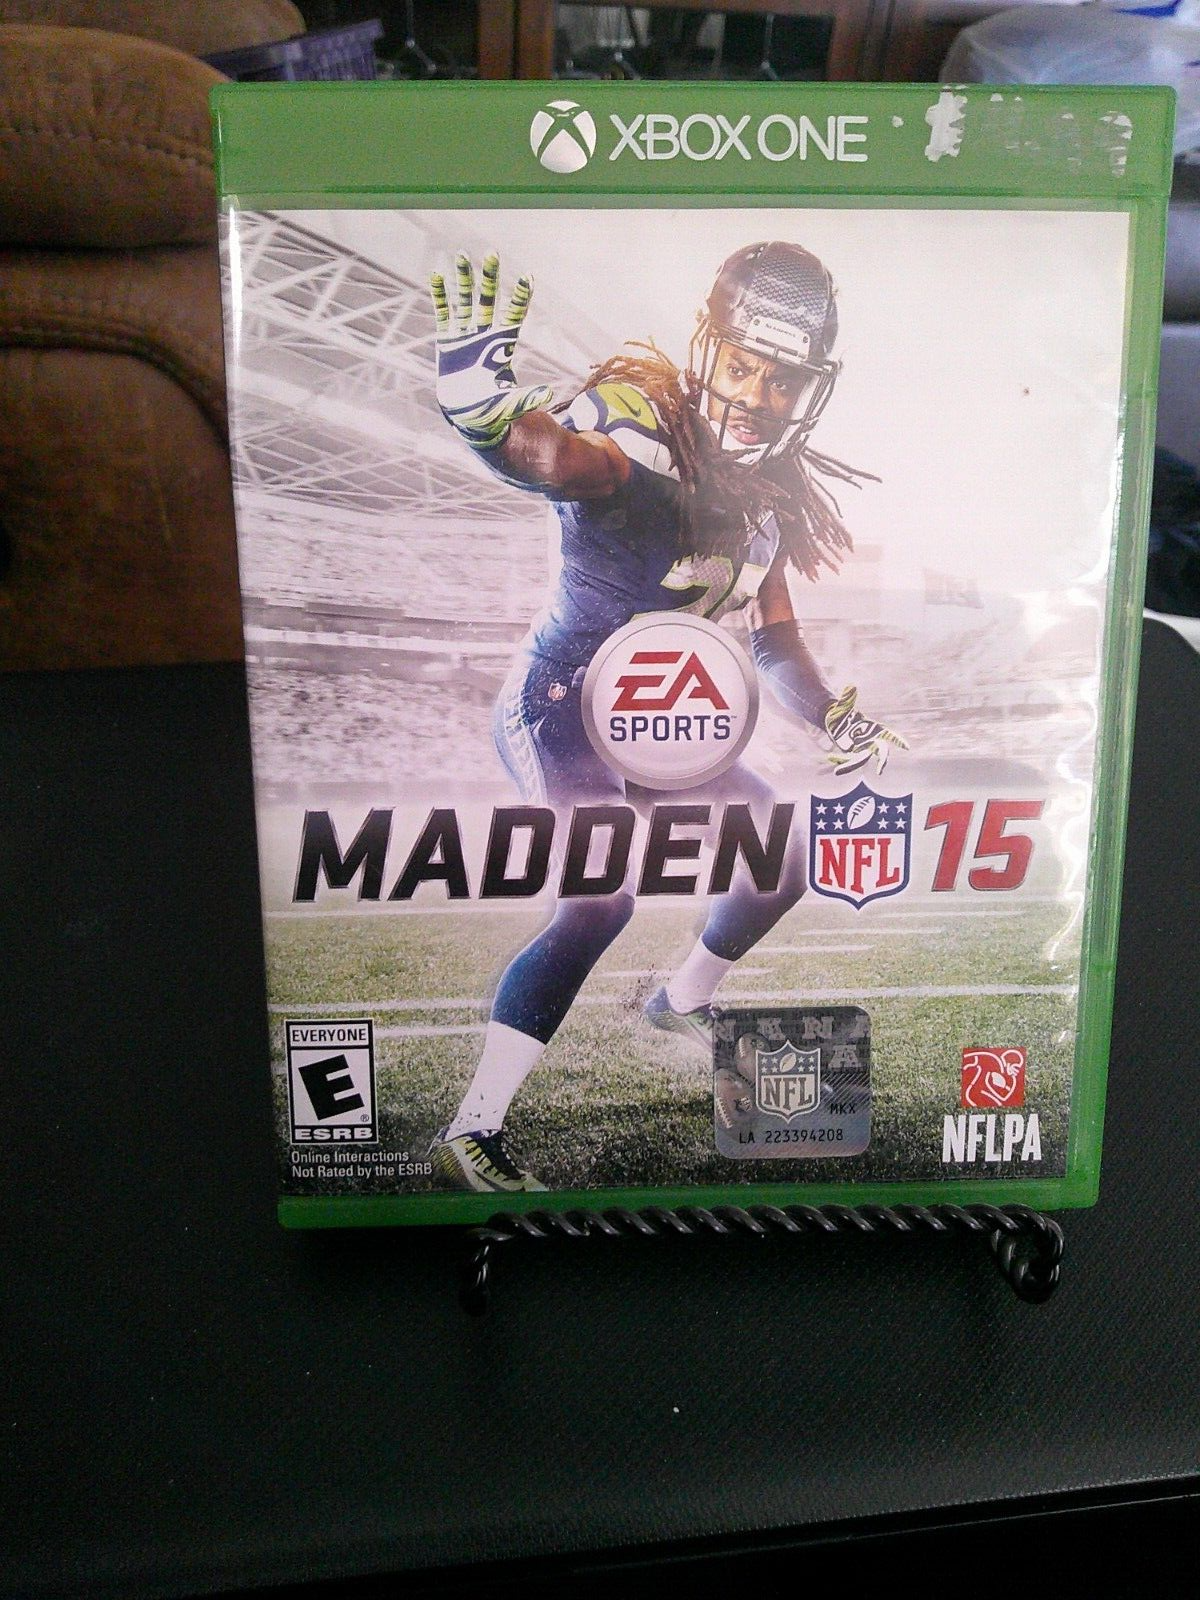 Primary image for Madden NFL 15 (Microsoft Xbox One, 2014)